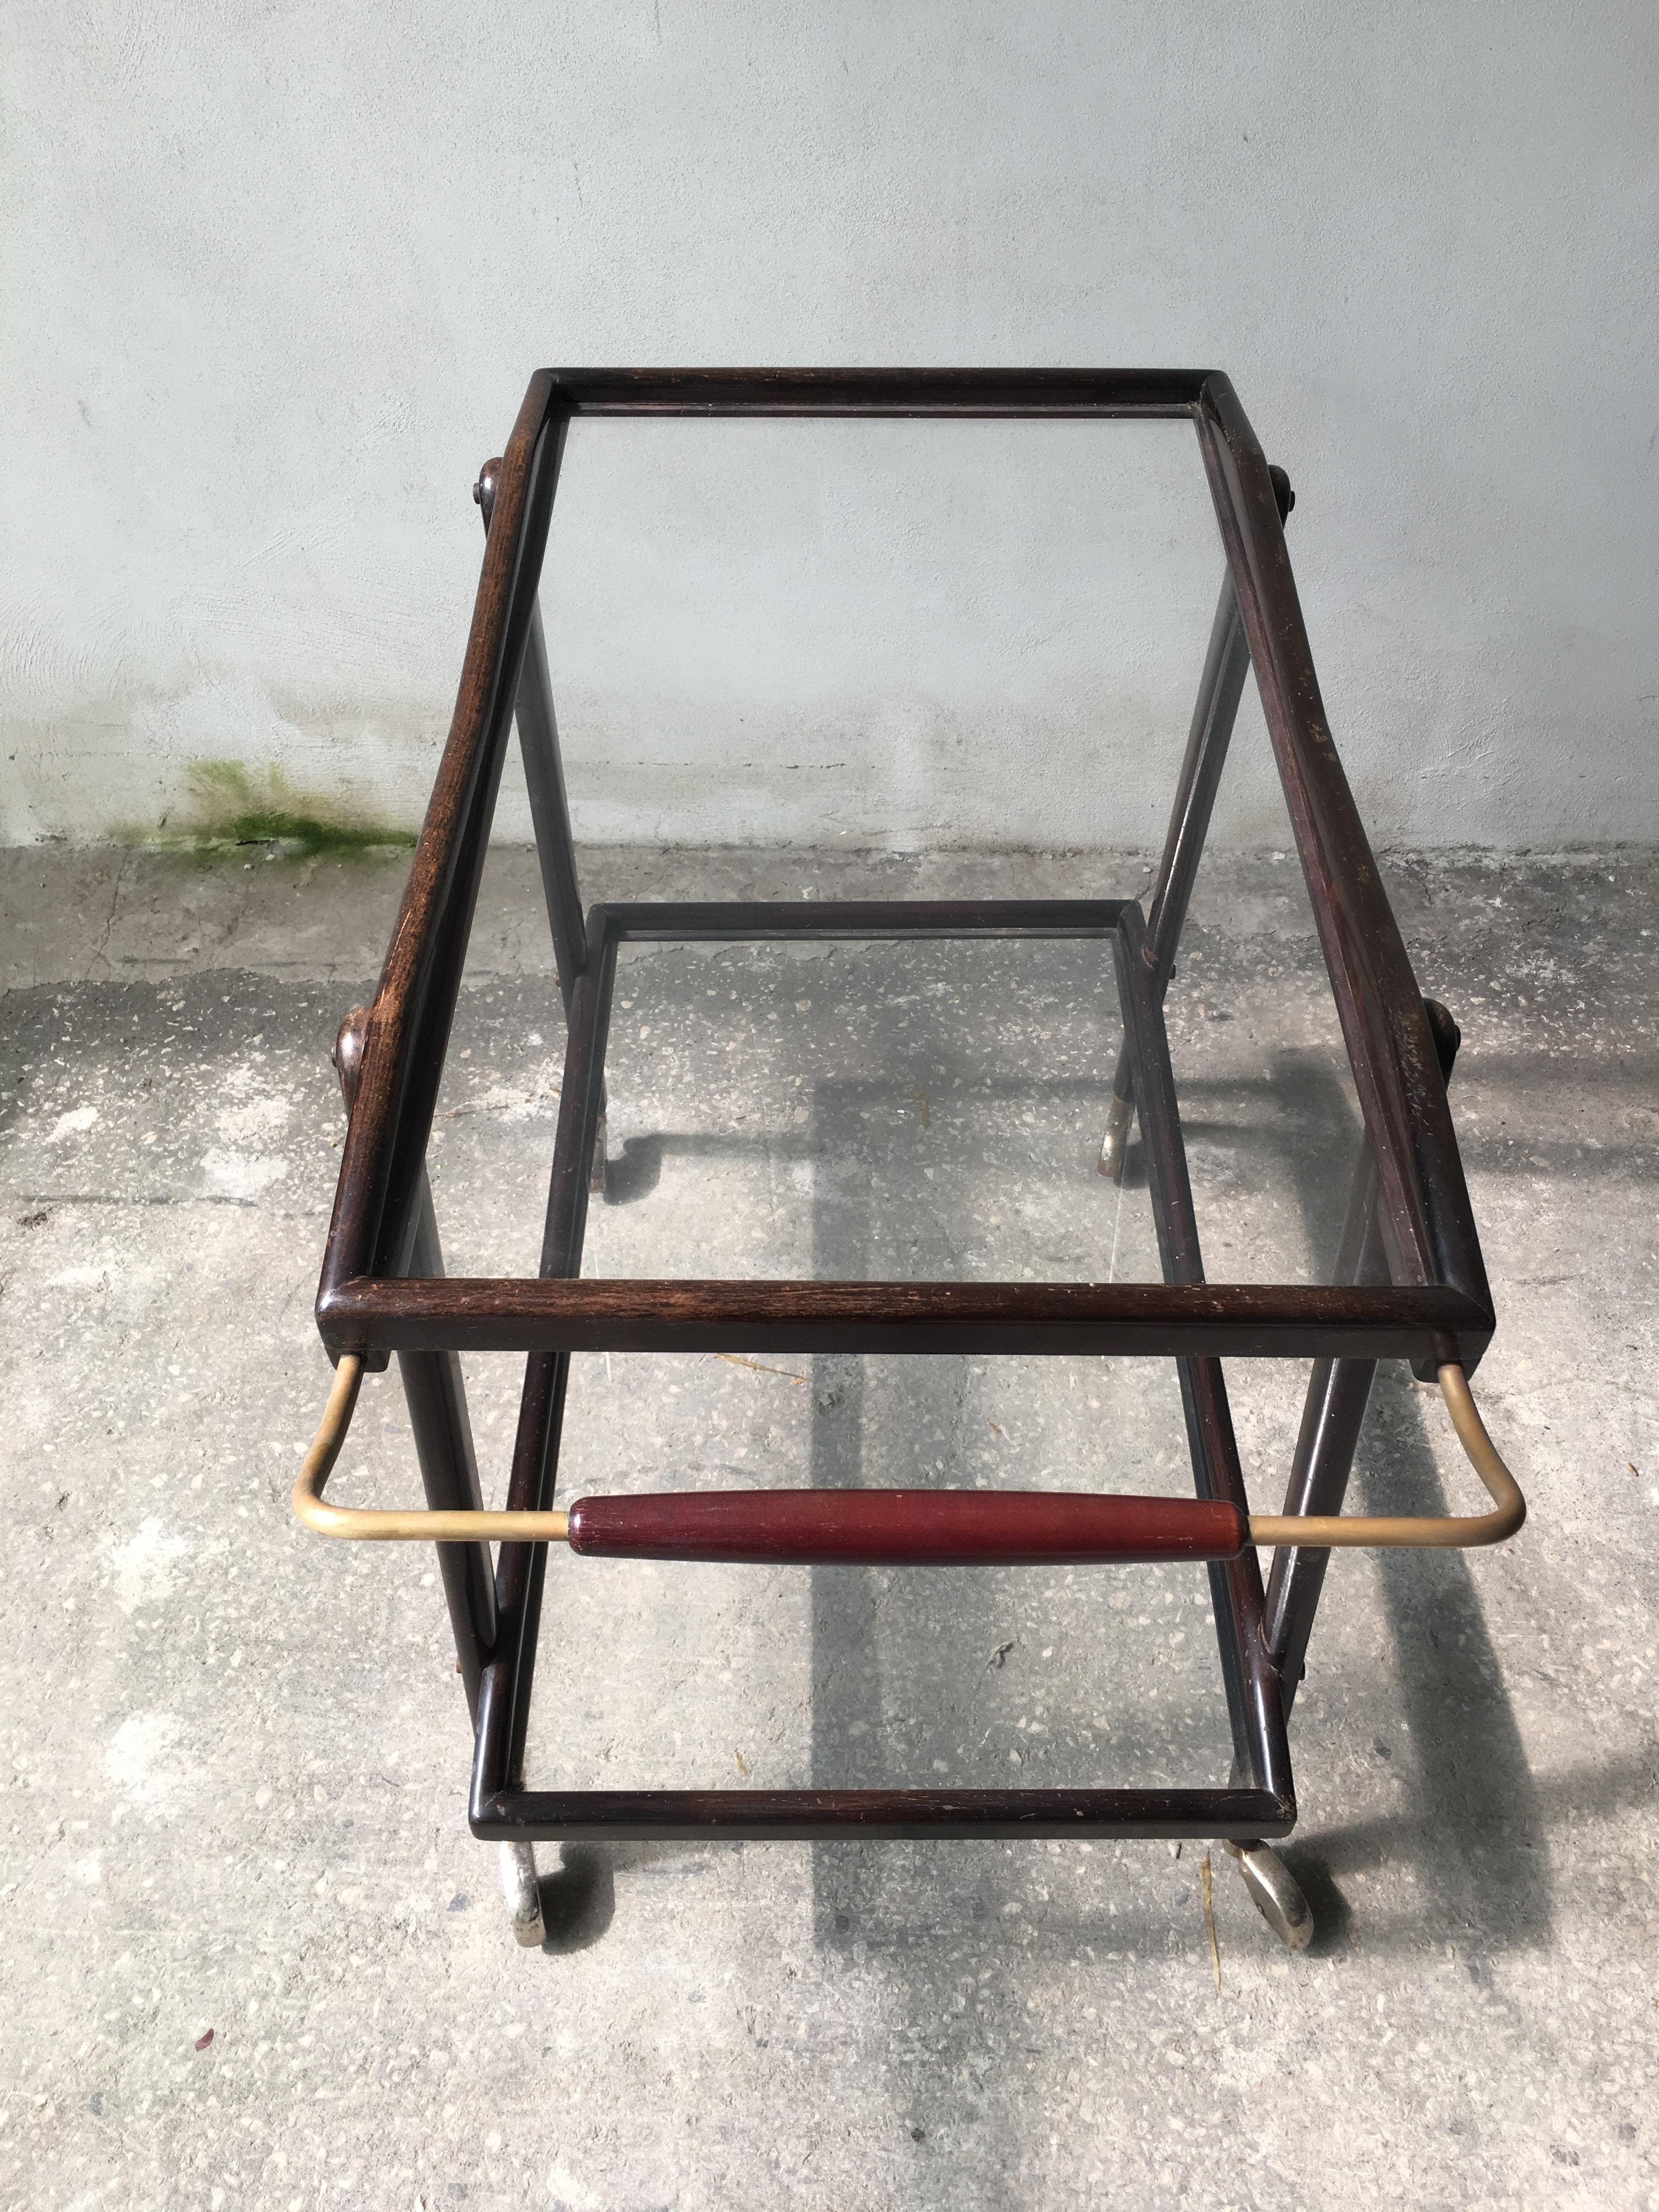 Mahogany Italian Bar Cart or Trolley Designed by Cesare Lacca, 1950s (Messing) im Angebot